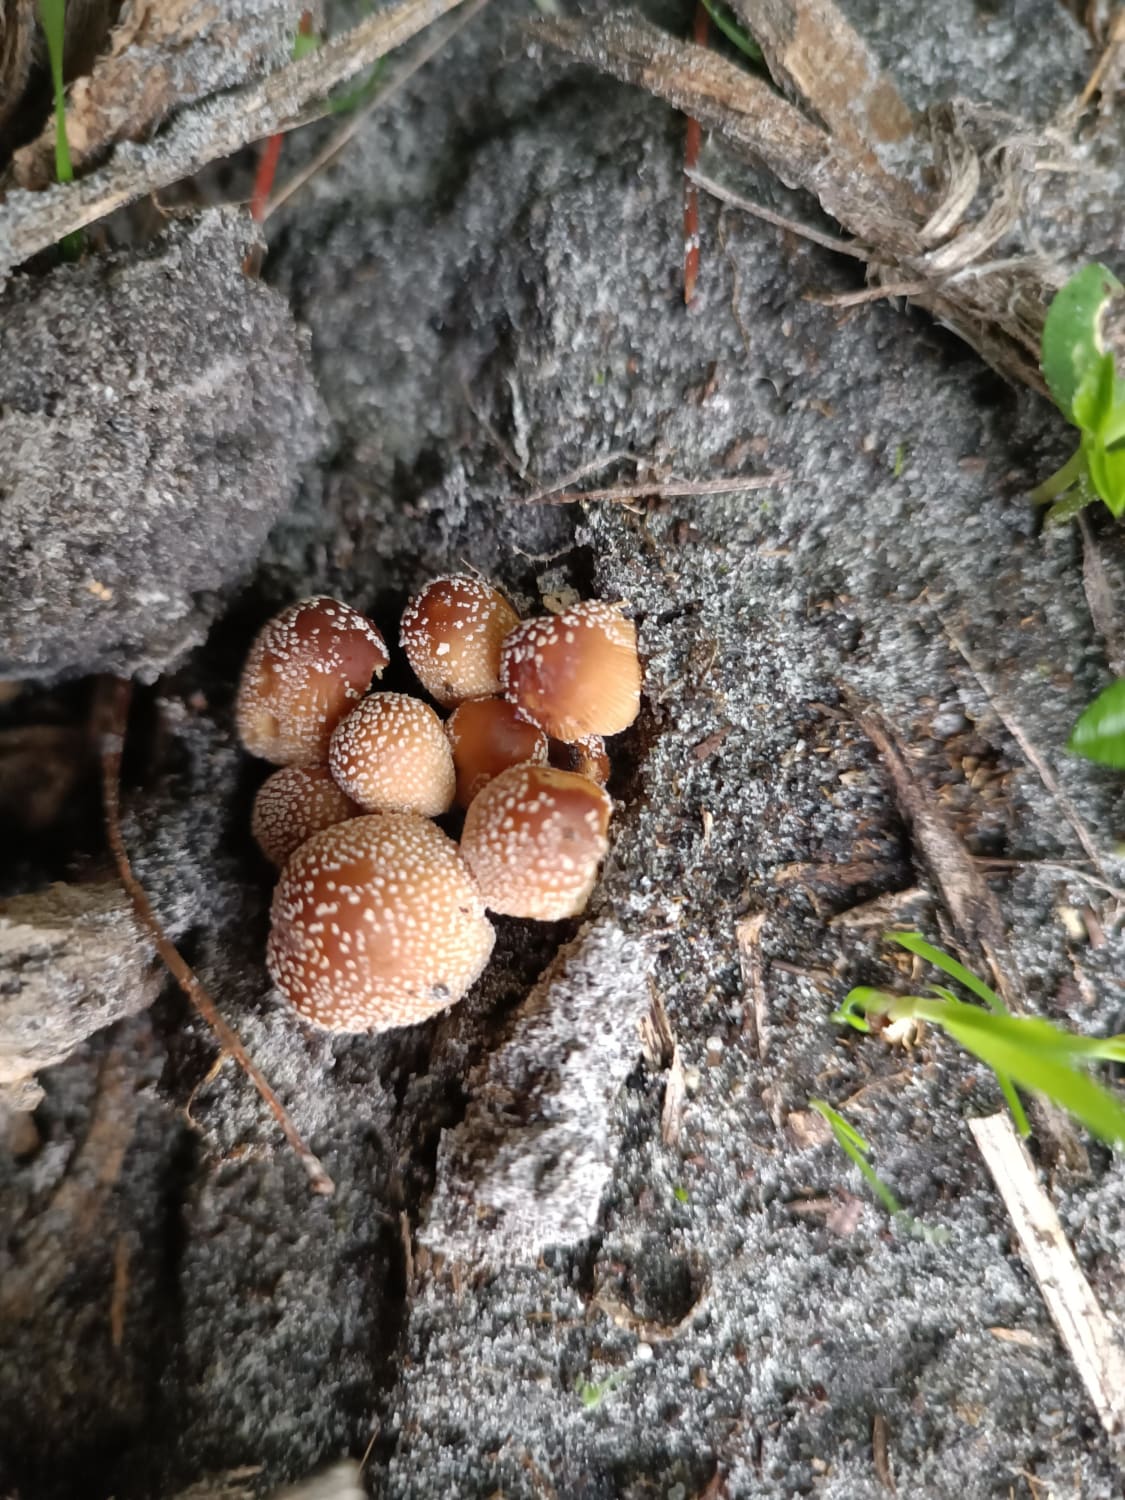 no idea what they are, South West Australia.